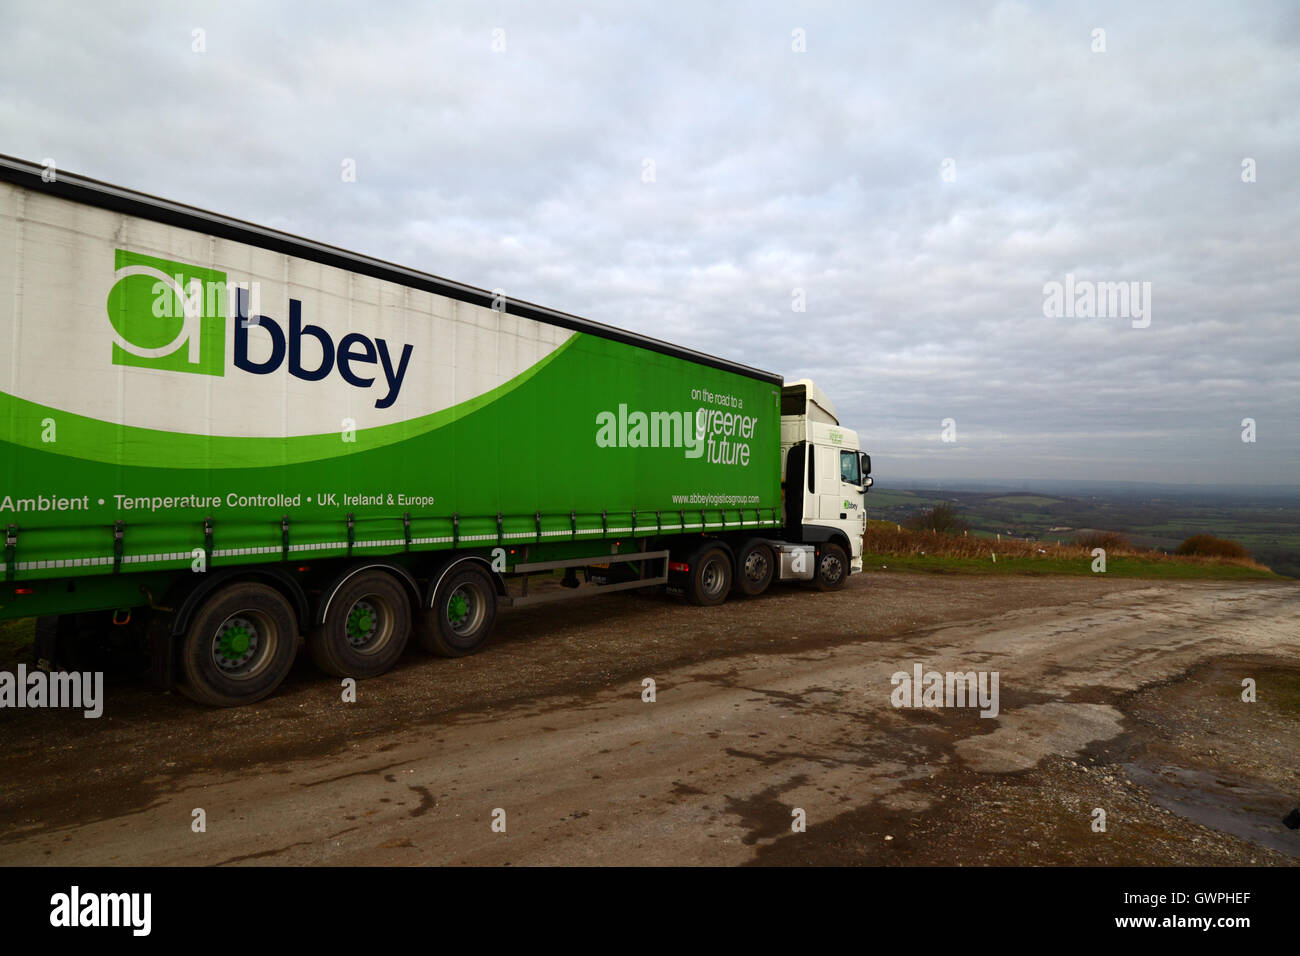 Abbey Logistics Group Limited lorry at Firle Beacon, South Downs National Park, East Sussex, England, UK Stock Photo